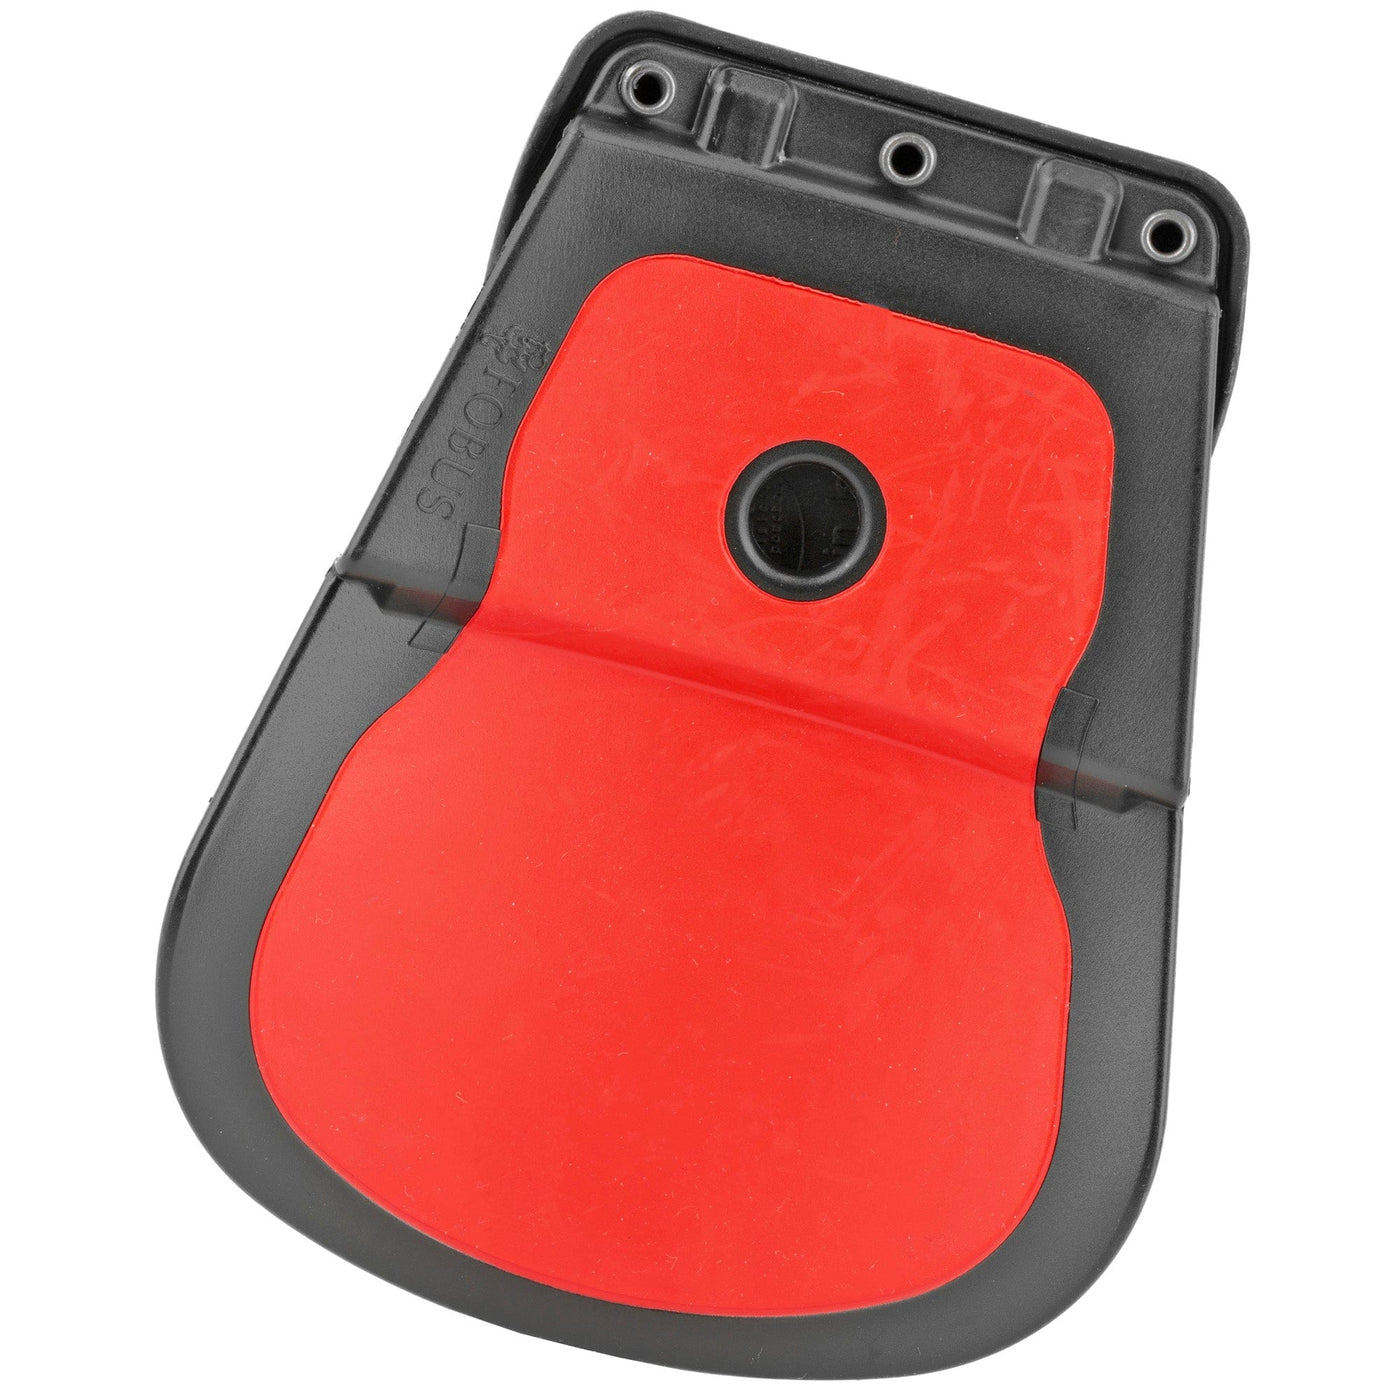 Fobus Fobus Holster E2 Paddle For - Walther Pp Ppk Ppks .380's Firearm Accessories